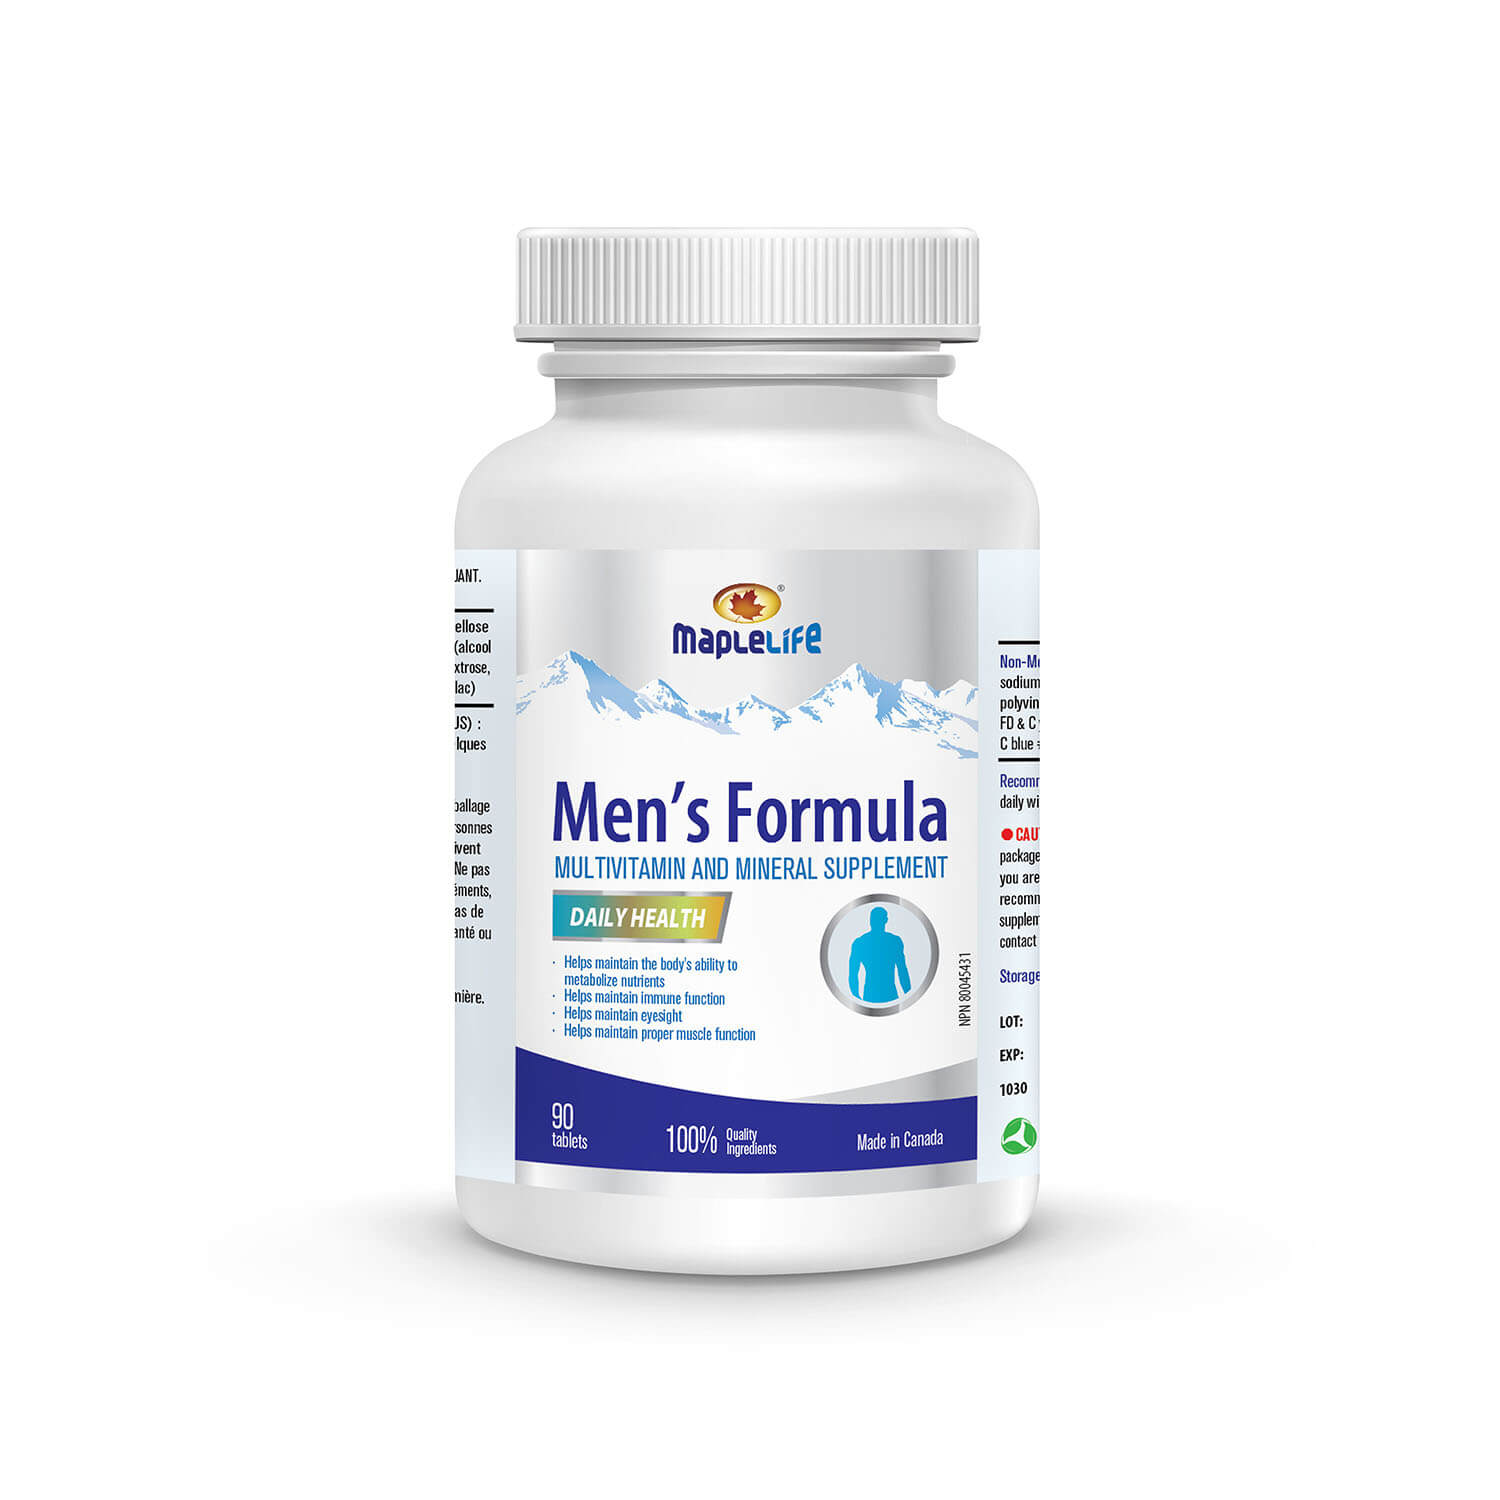 Men's Formula Multivitamin and Mineral Supplement 90 tablets Product Image